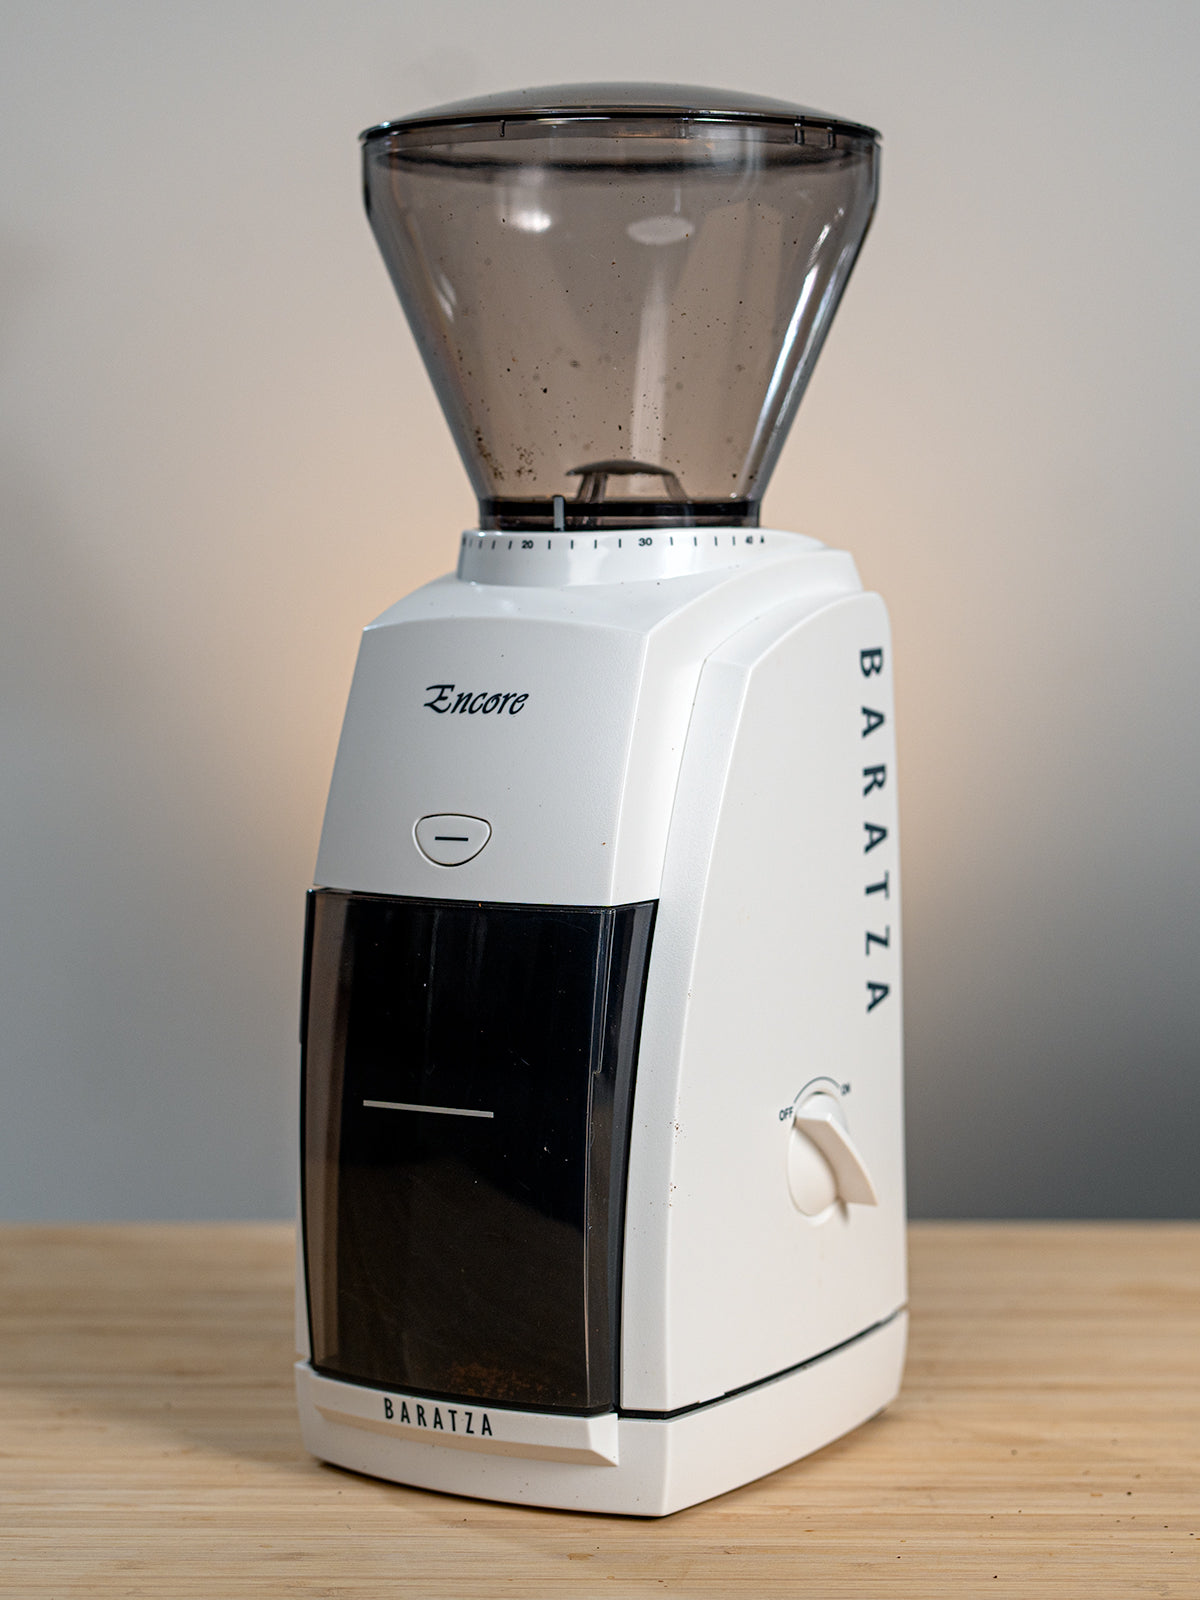 Baratza Encore Coffee Grinder - A great entry level coffee grinder that will fit most needs